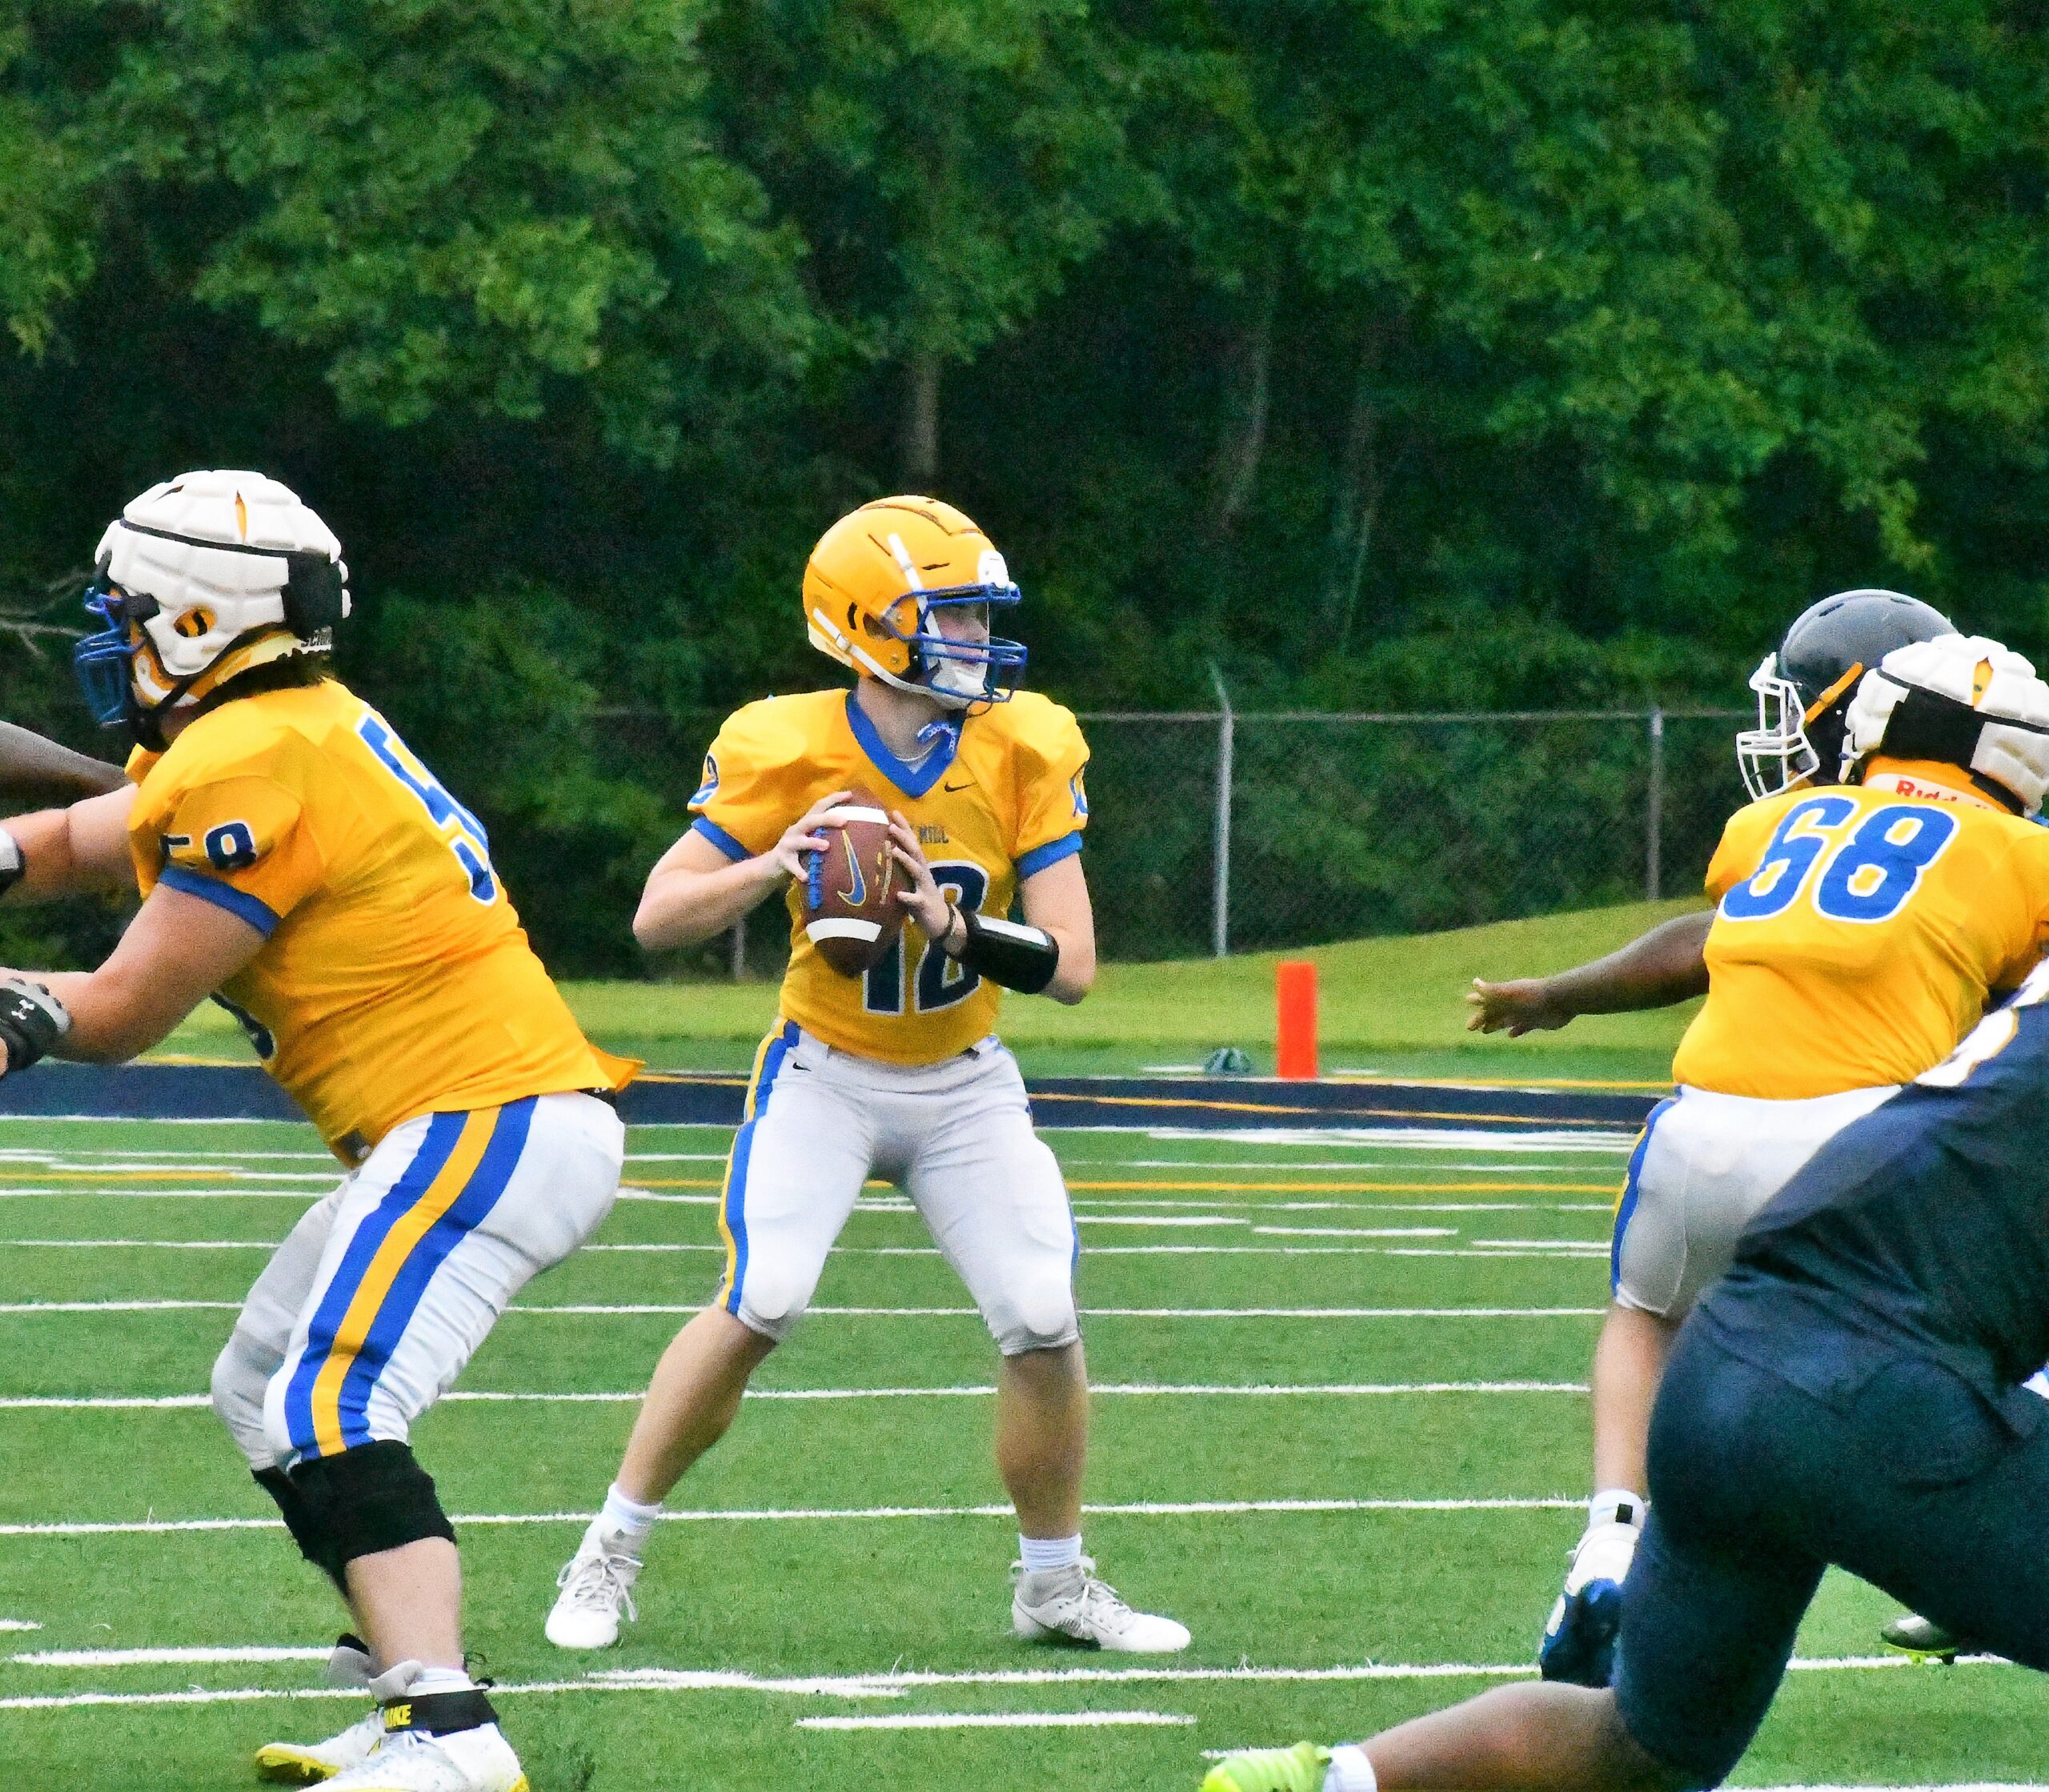 Fort Mill opening season up with several questions